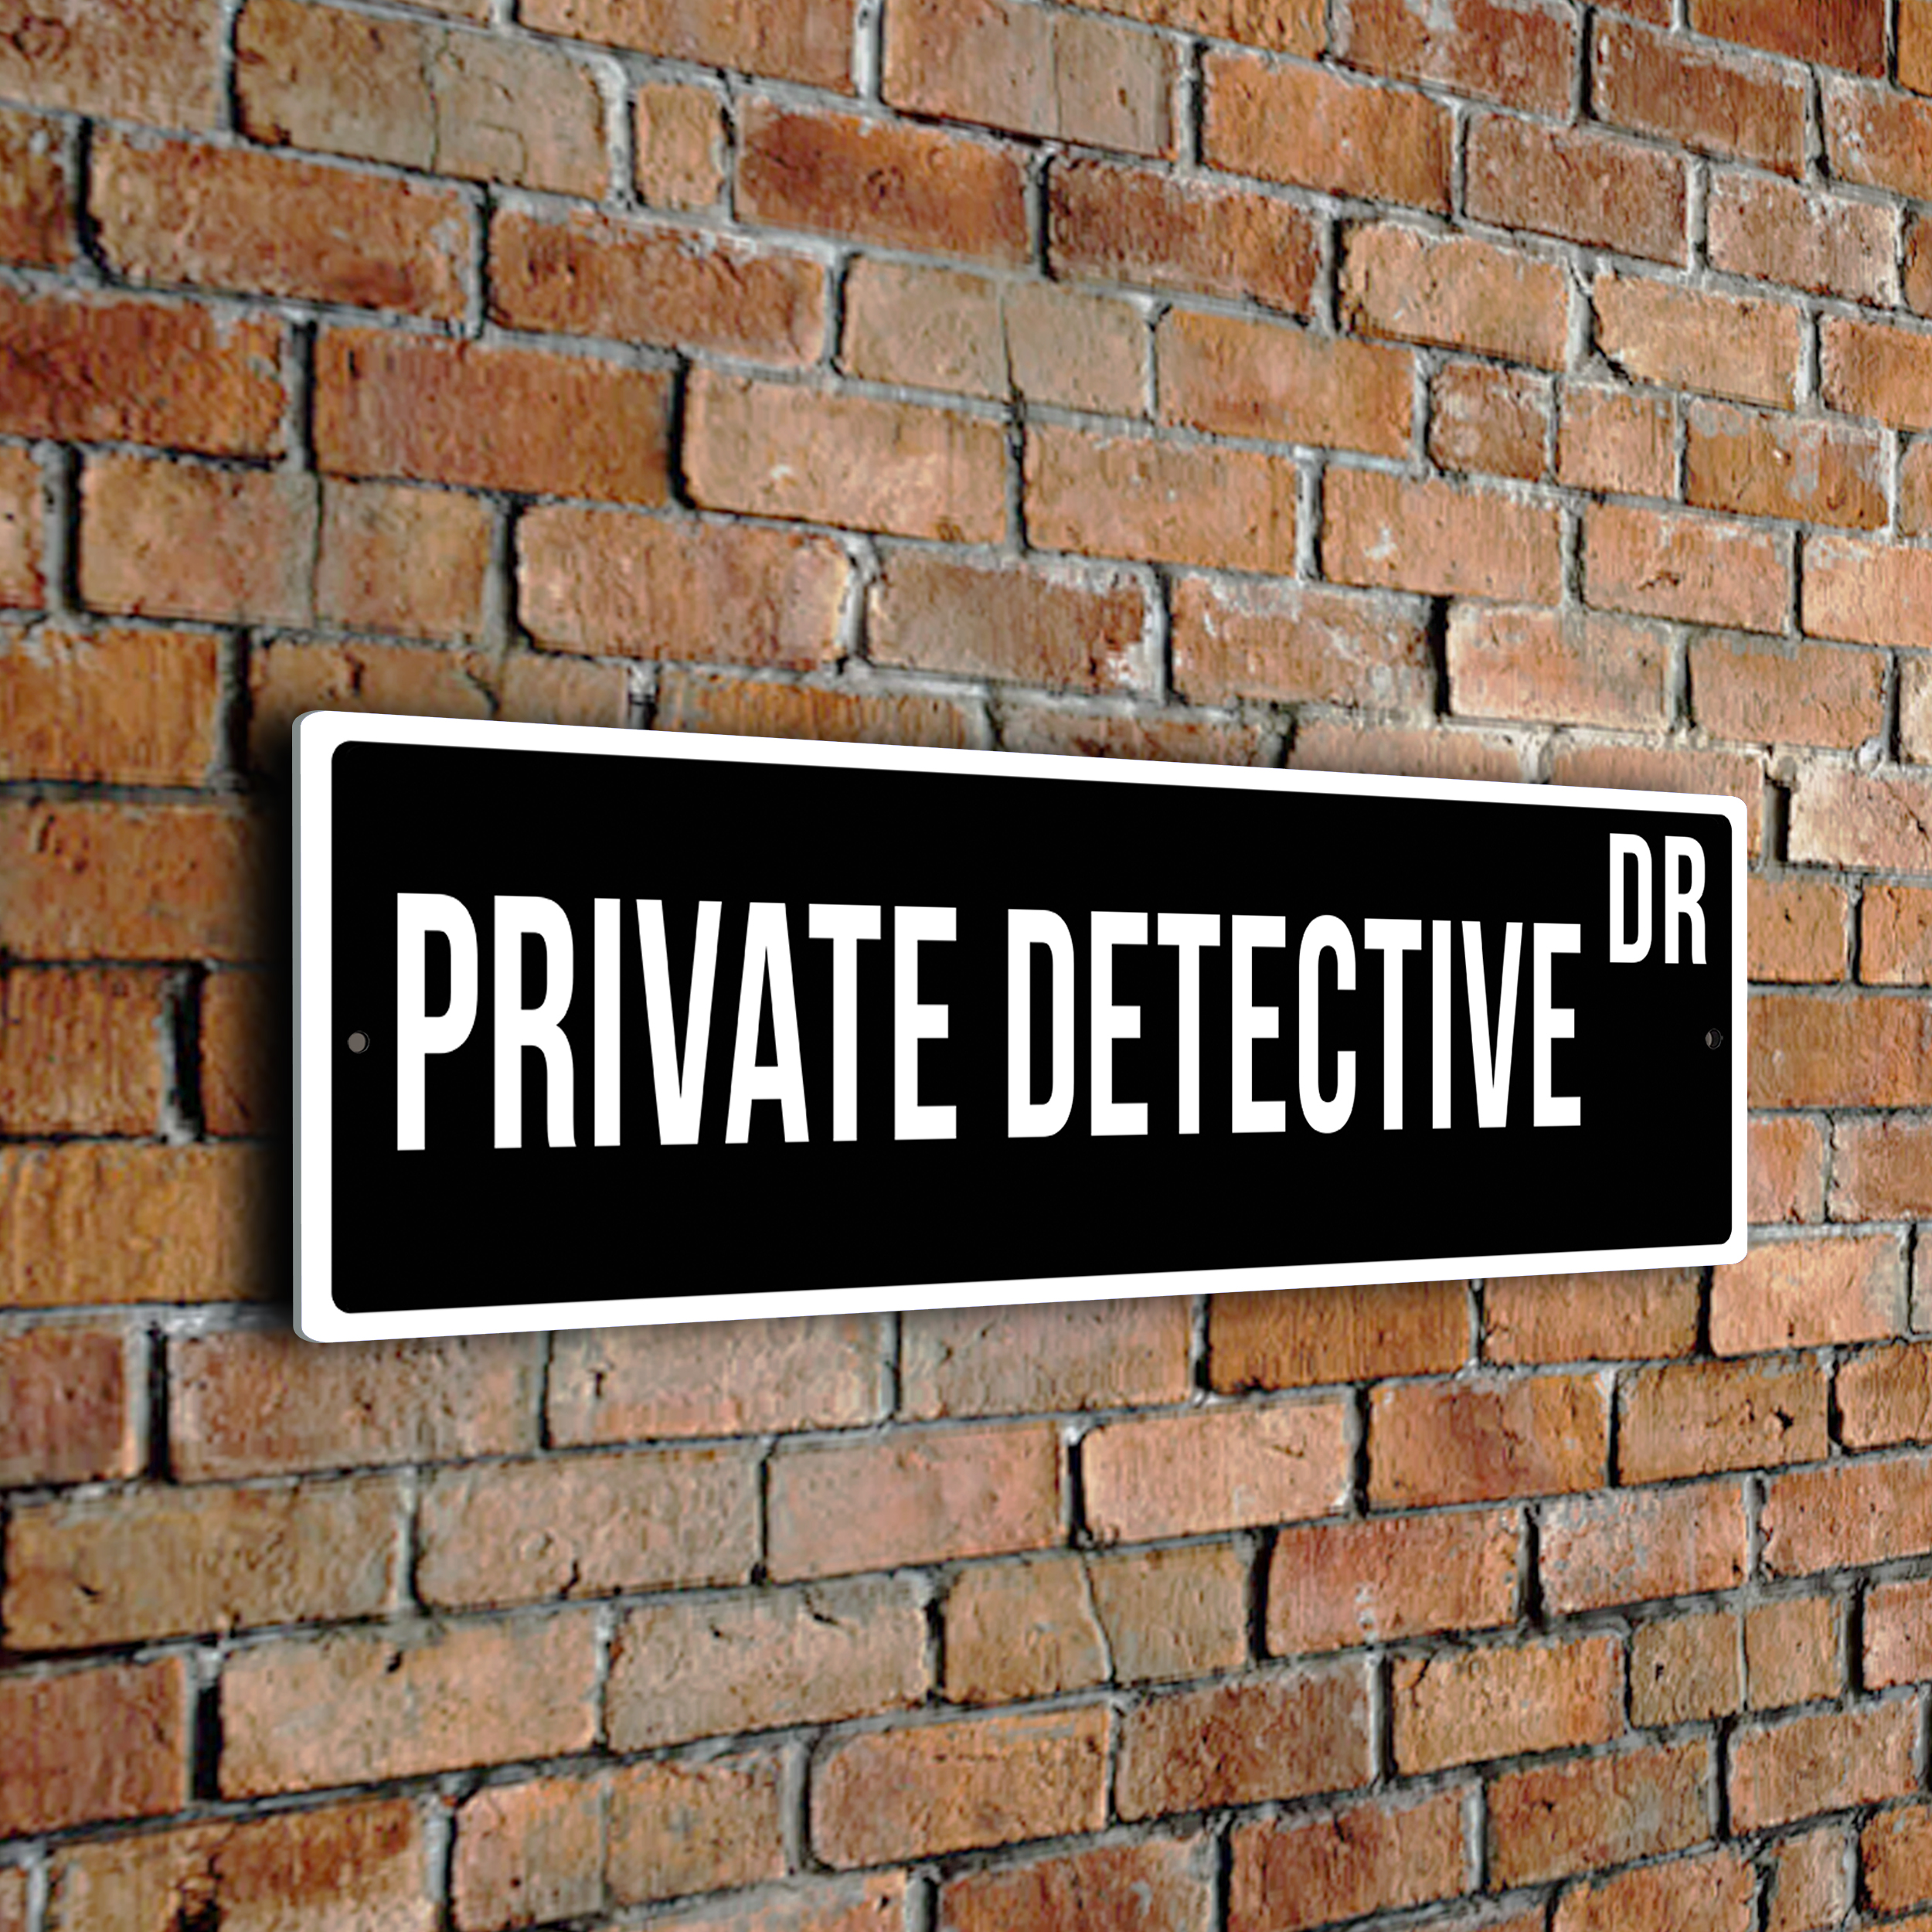 Private Detective street sign